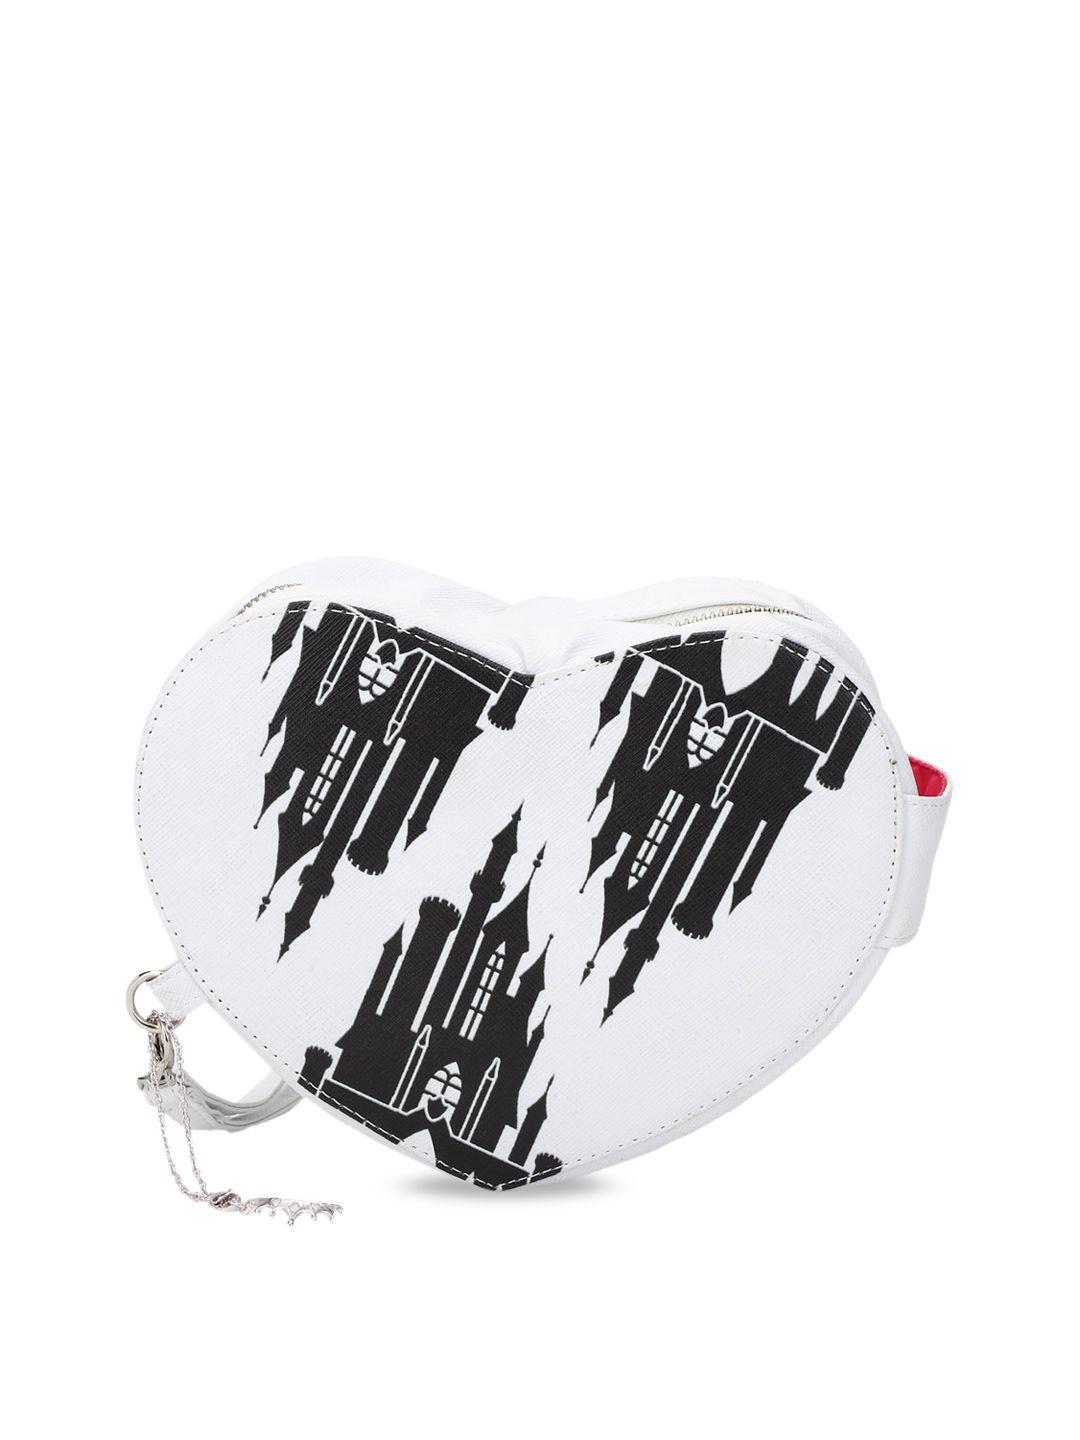 forever-21-white-&-black-printed-purse-clutch